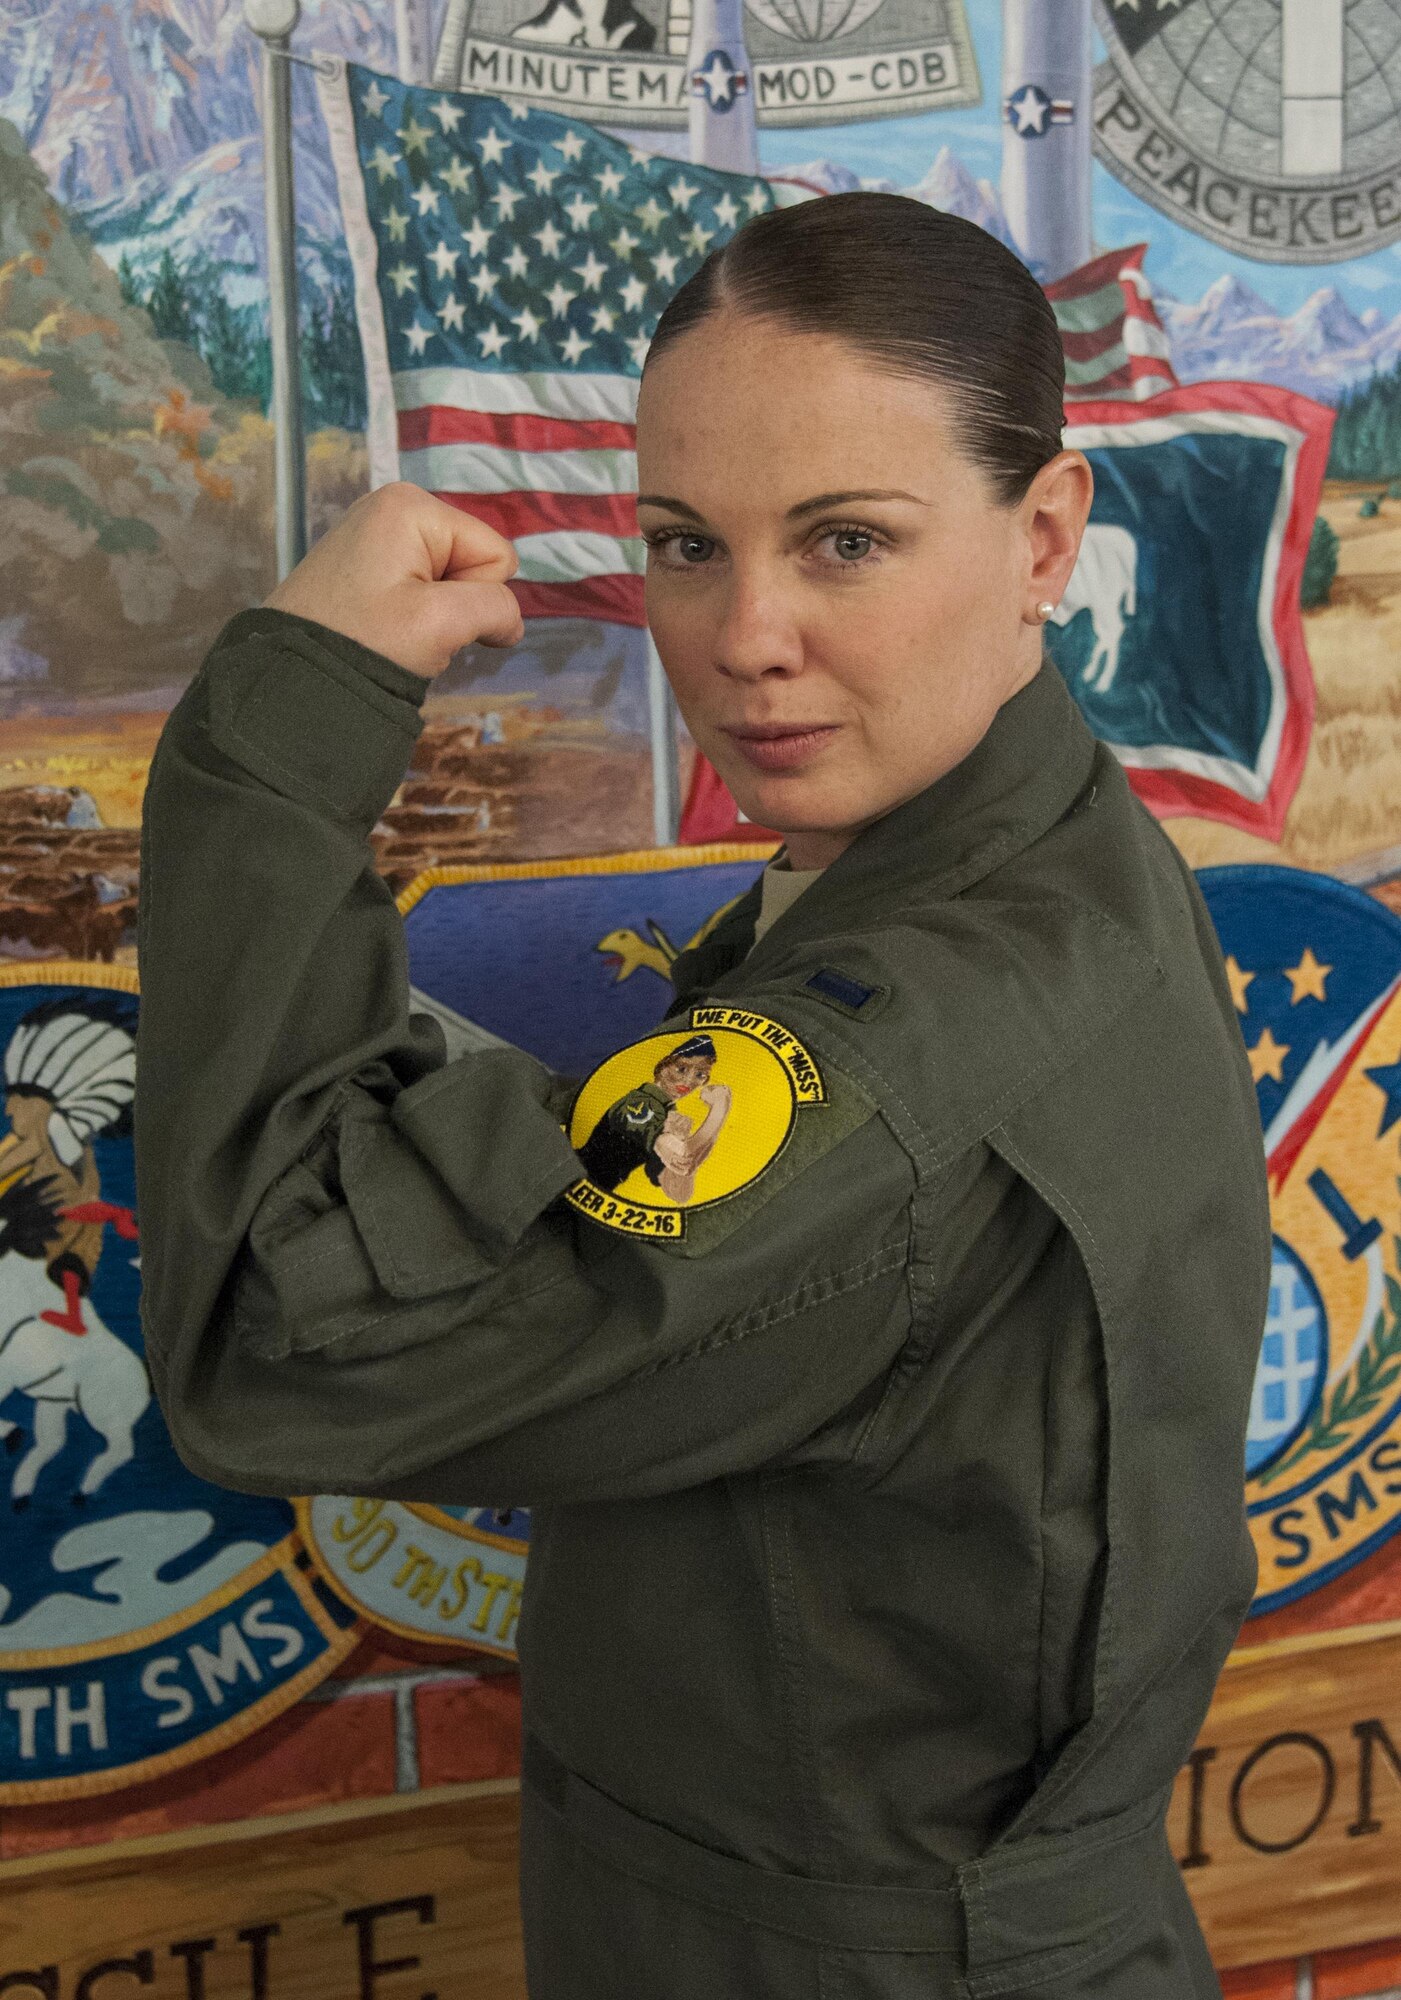 First Lt. Kelly Gorham, 320th Missile Squadron missile combat crew commander, poses March 22, 2016 in the 90th Operations Group building wearing a patch commemorating that day's all-female missile crew contingent at F.E. Warren Air Force Base, Wyo. Gorham and fellow female missileers commanded the launch control centers controlled by the base in honor of Women’s History Month. (U.S. Air Force photo by Senior Airman Jason Wiese). 